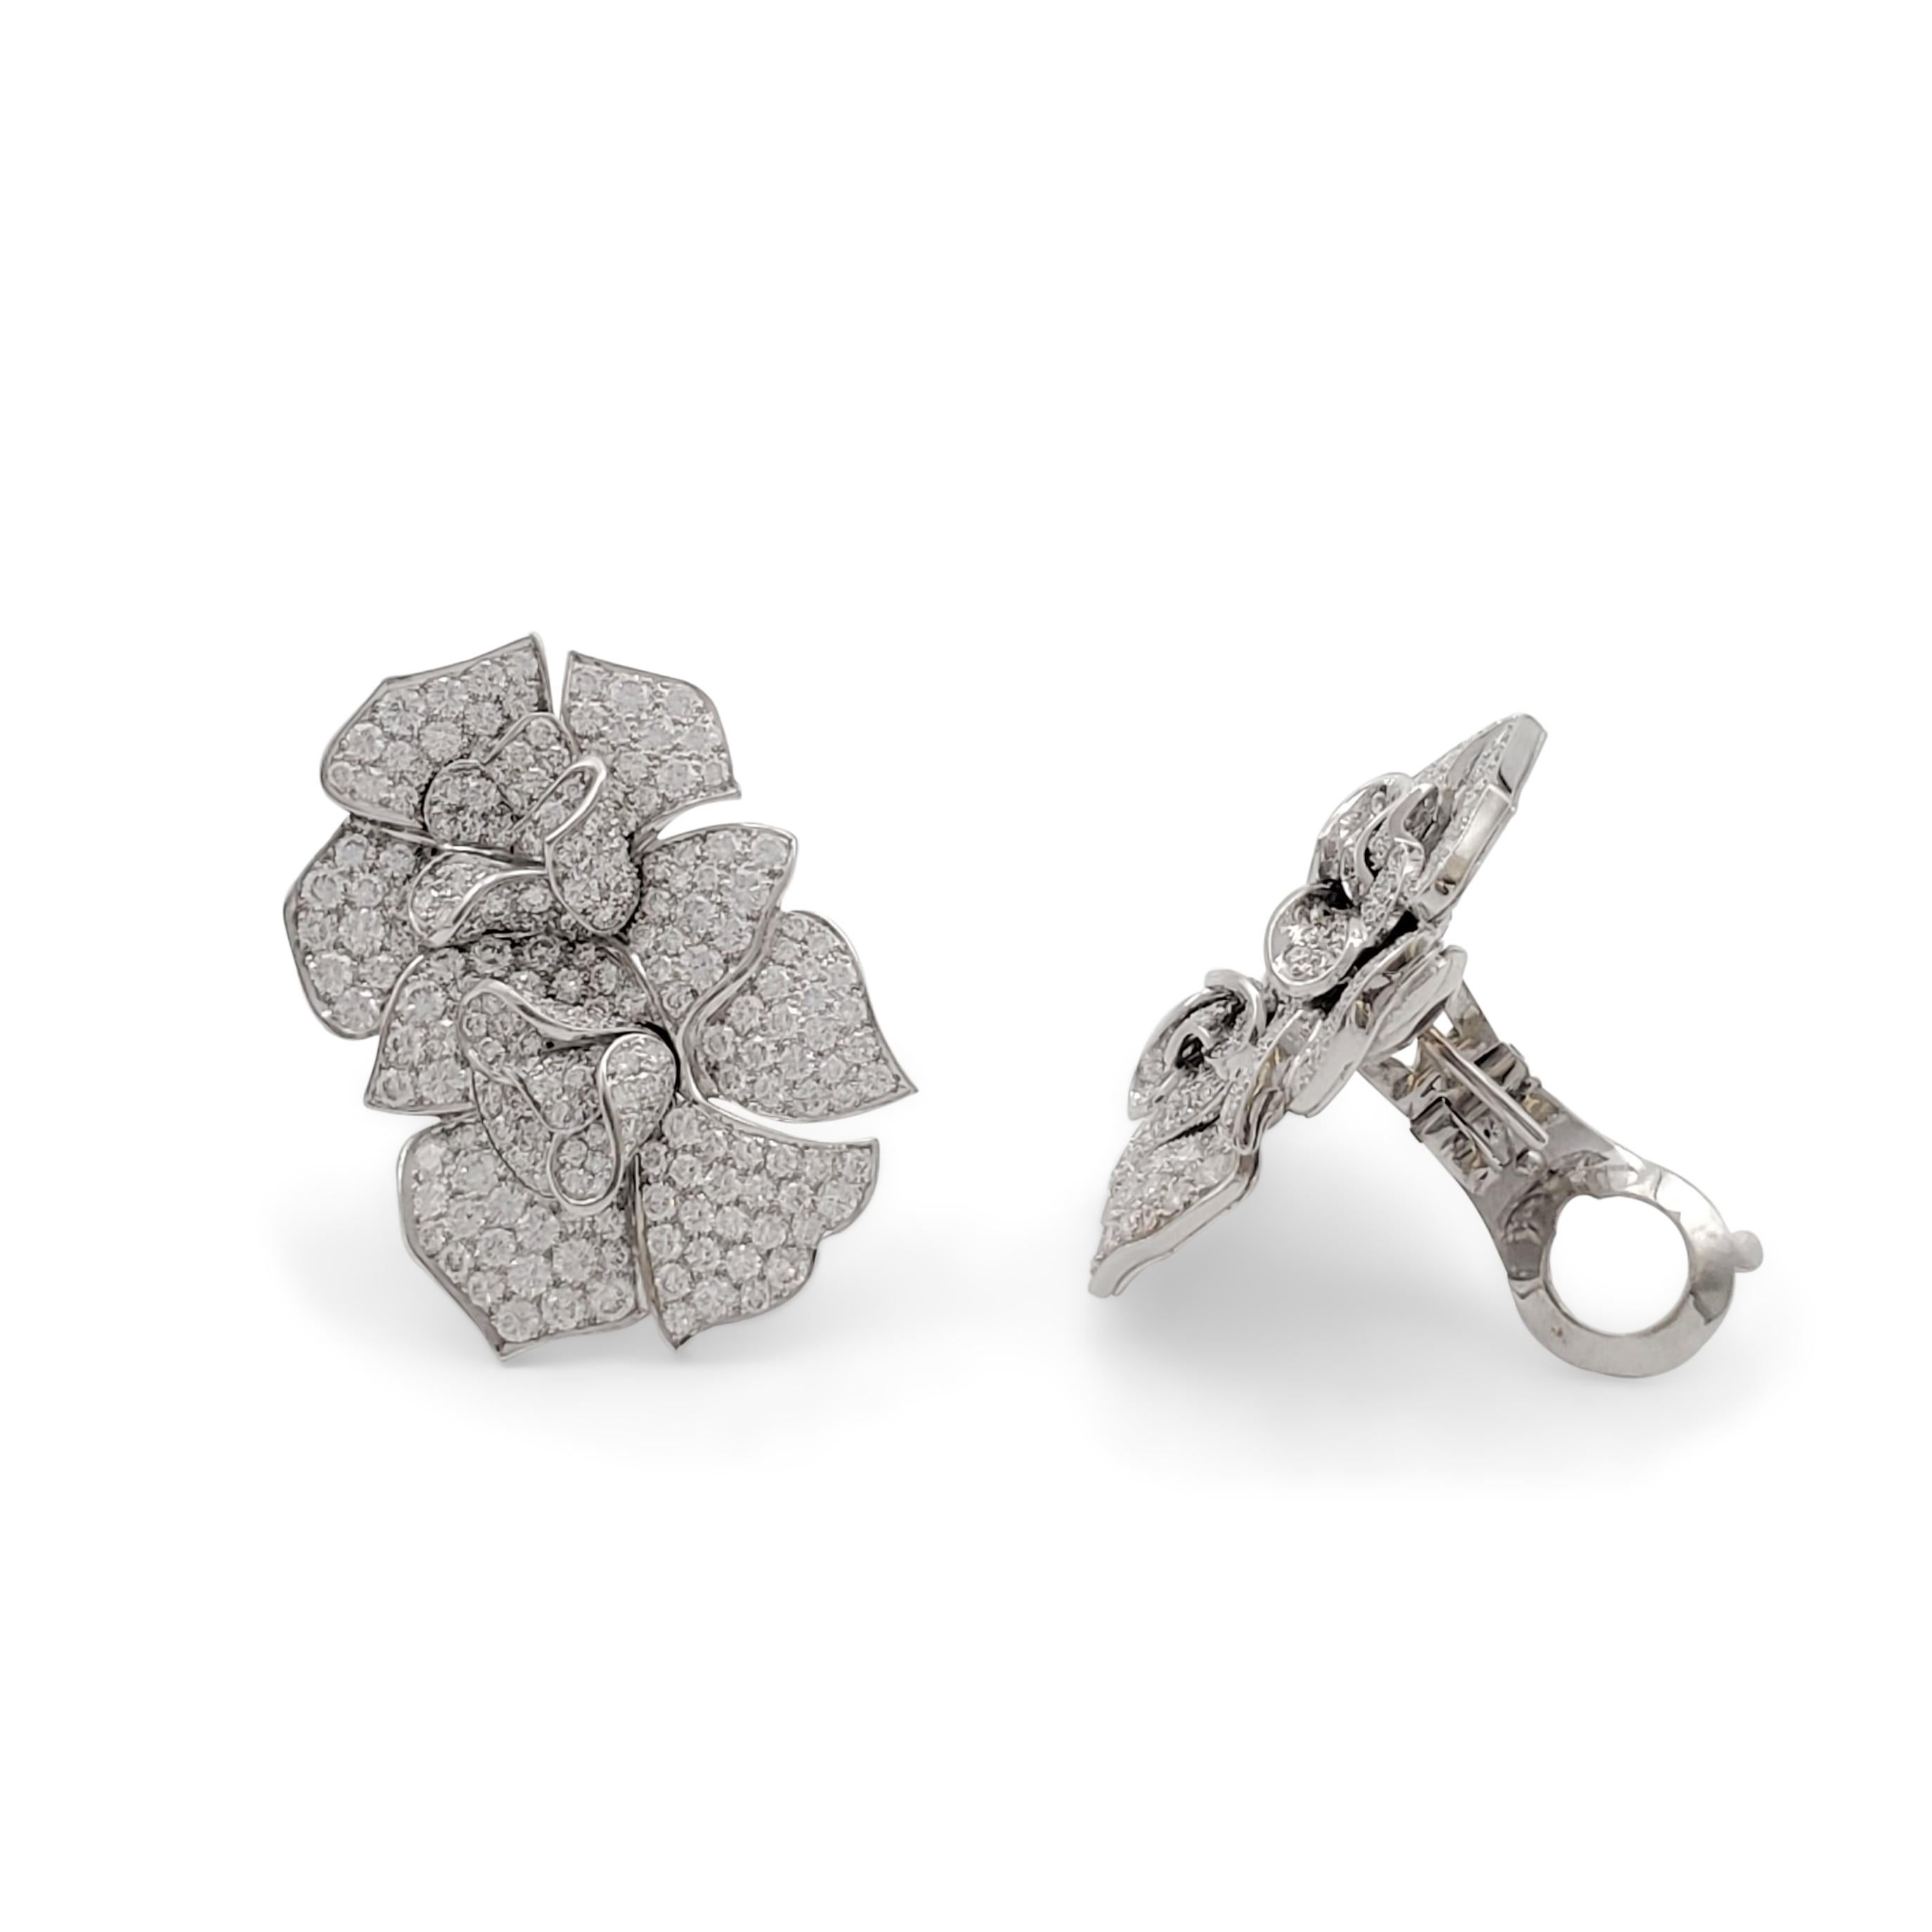 Authentic floral Van Cleef & Arpels ear clips crafted in 18 karat white gold and set with an estimated 11 carats of high-quality (E-F, VS) round brilliant cut diamonds. Signed Van Cleef & Arpels, 750, with serial number and French hallmarks. The